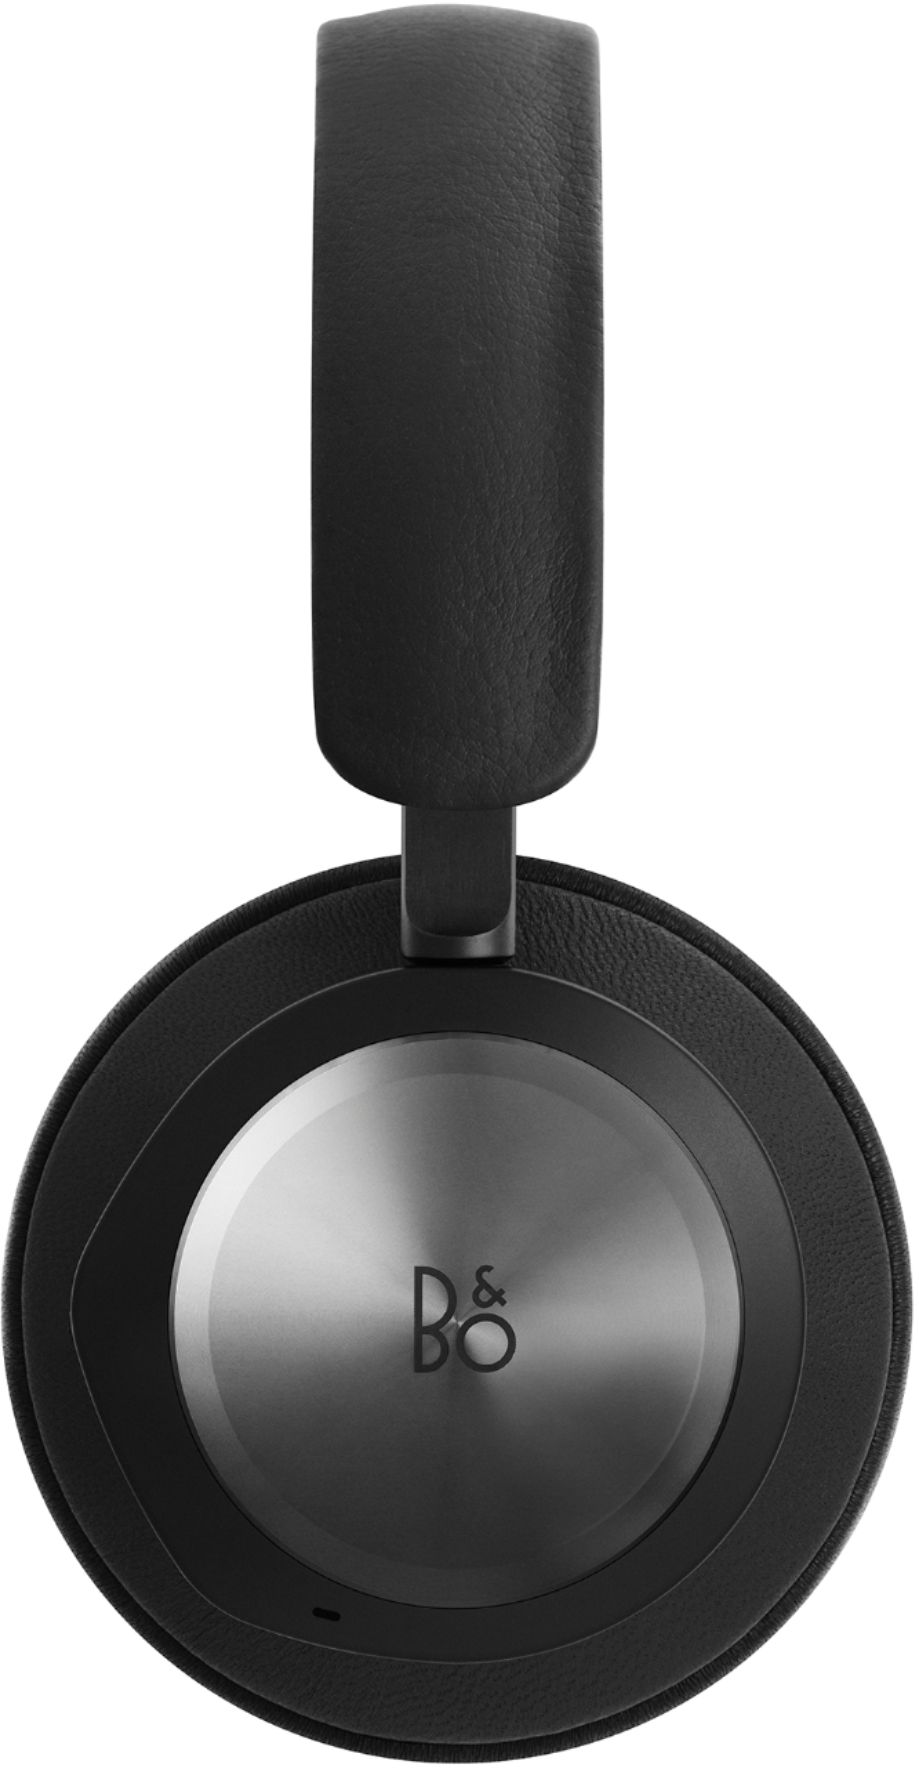 Bang & Olufsen - Beoplay Portal Xbox Wireless Noise Cancelling Over-the-Ear Headphones - Black Anthracite